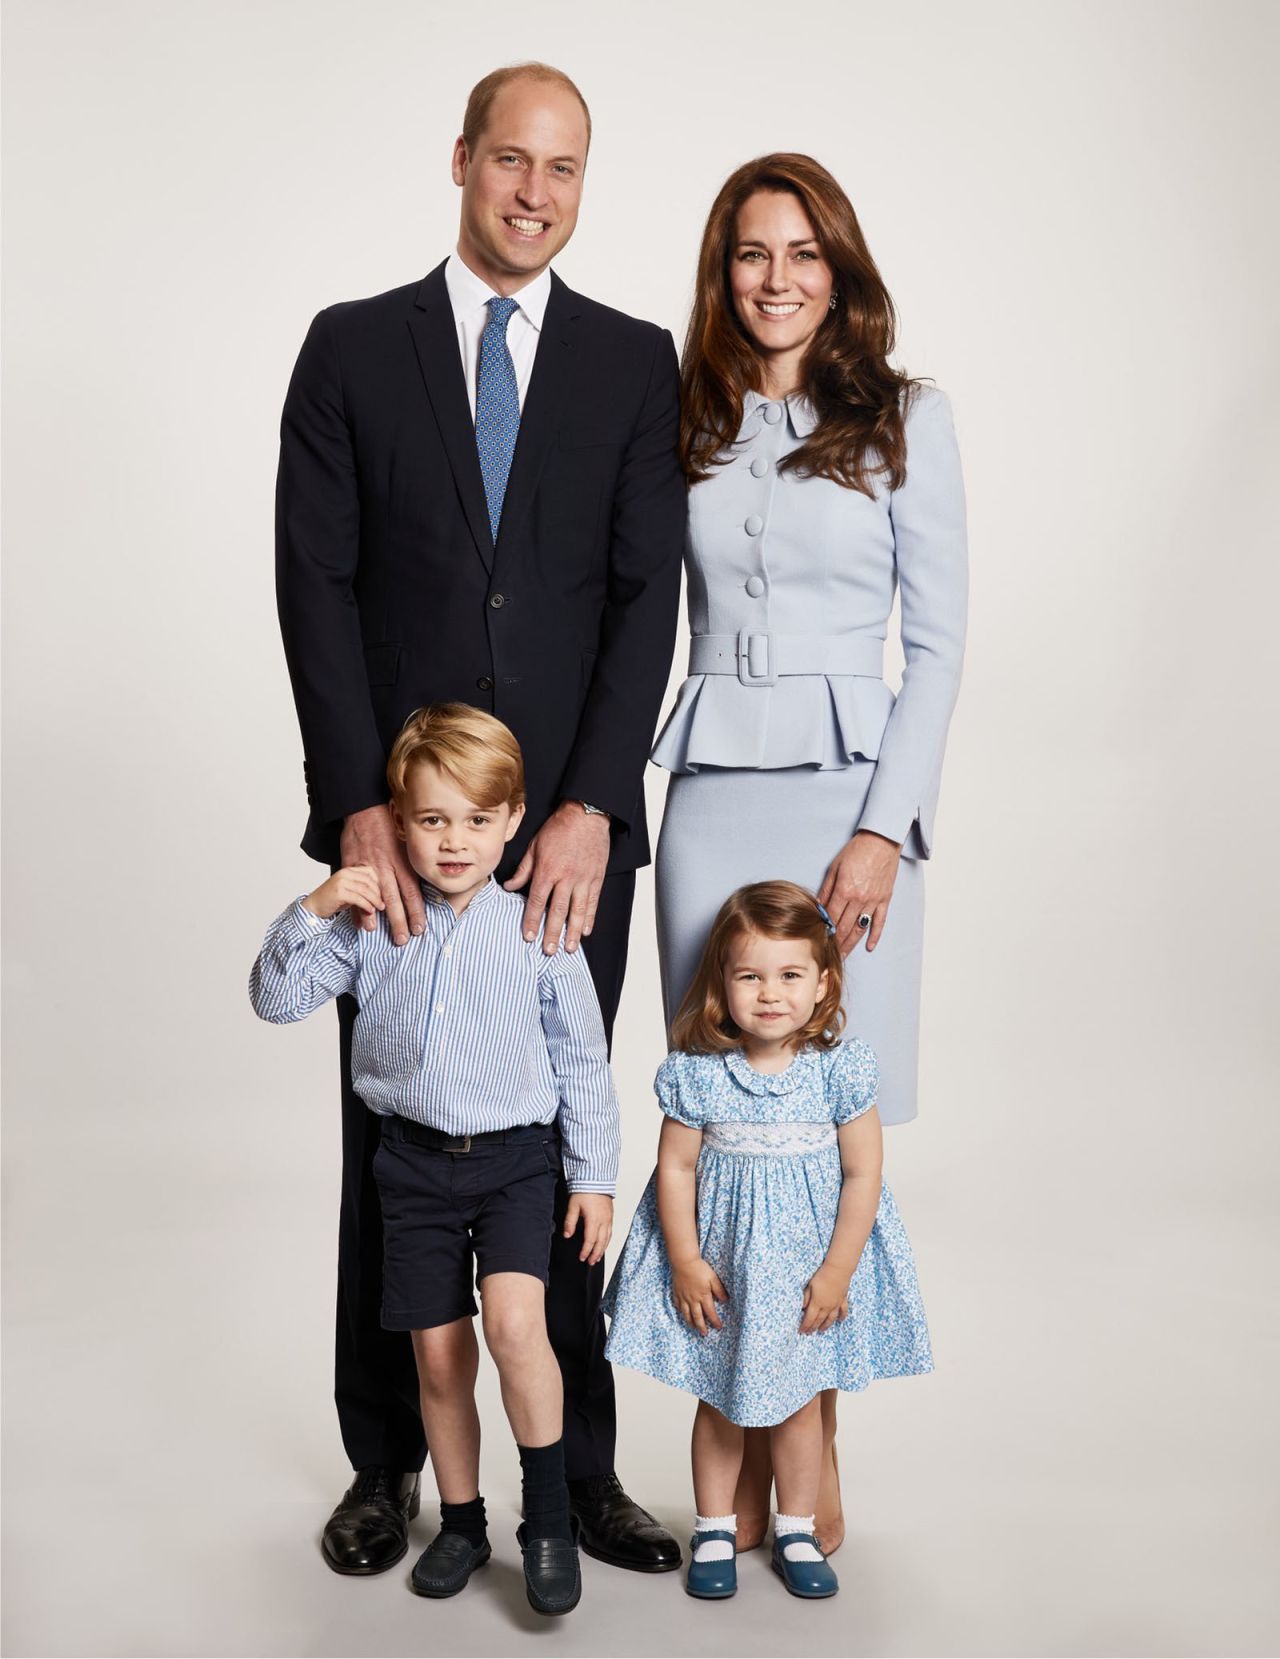 This image of William, Catherine, George and Charlotte was used for the family's 2017 Christmas card.